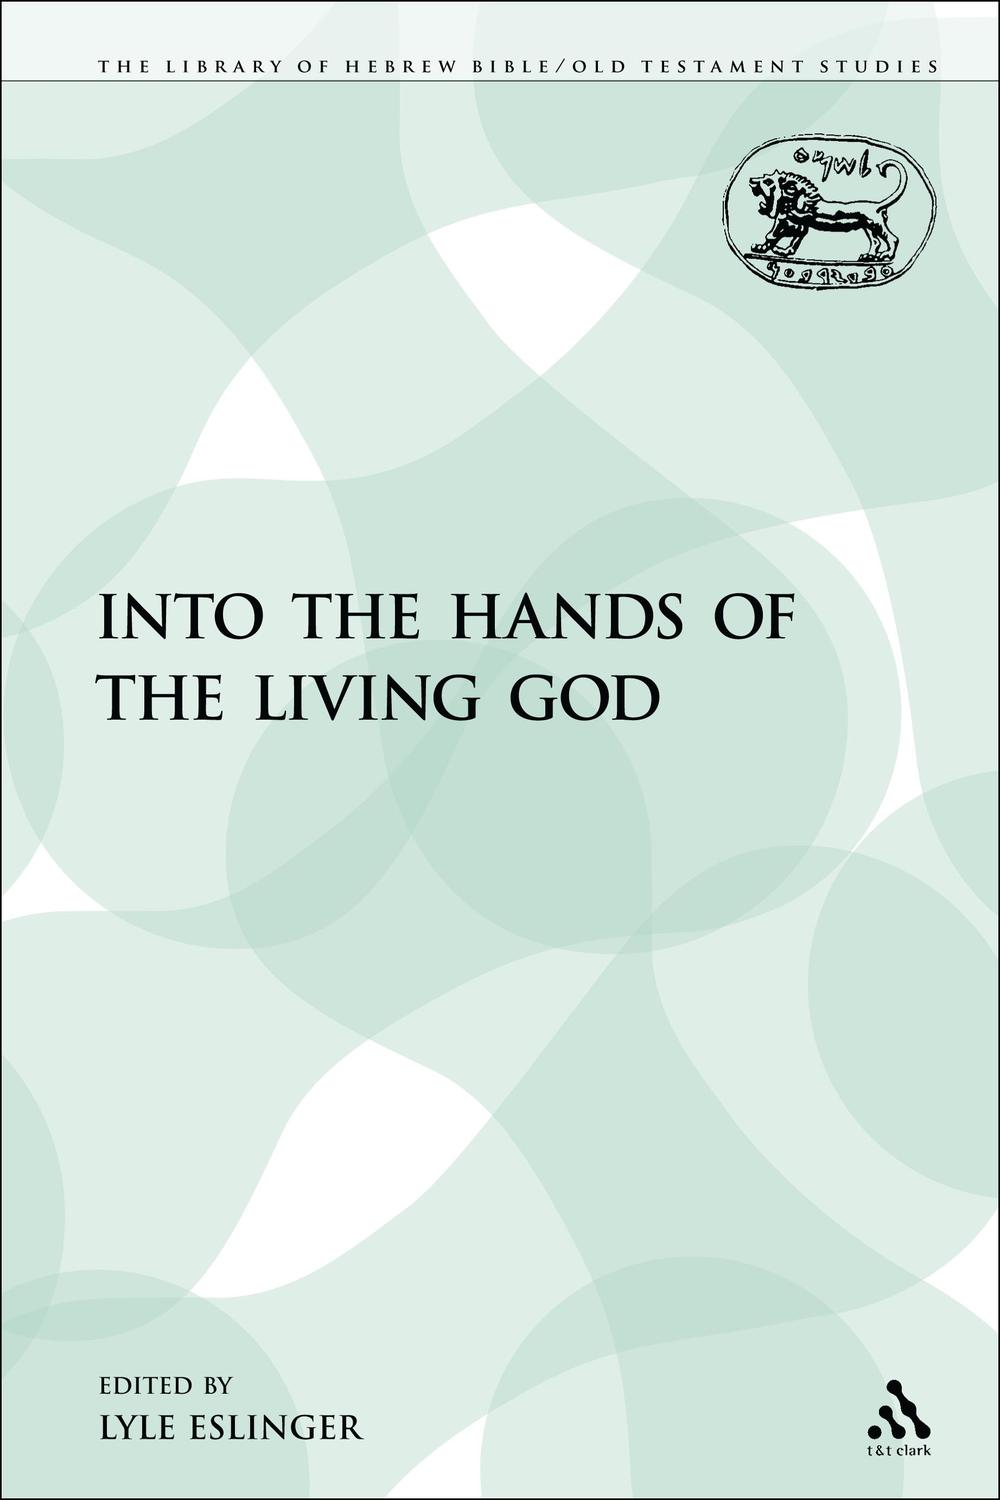 Into the Hands of the Living God - Lyle Eslinger